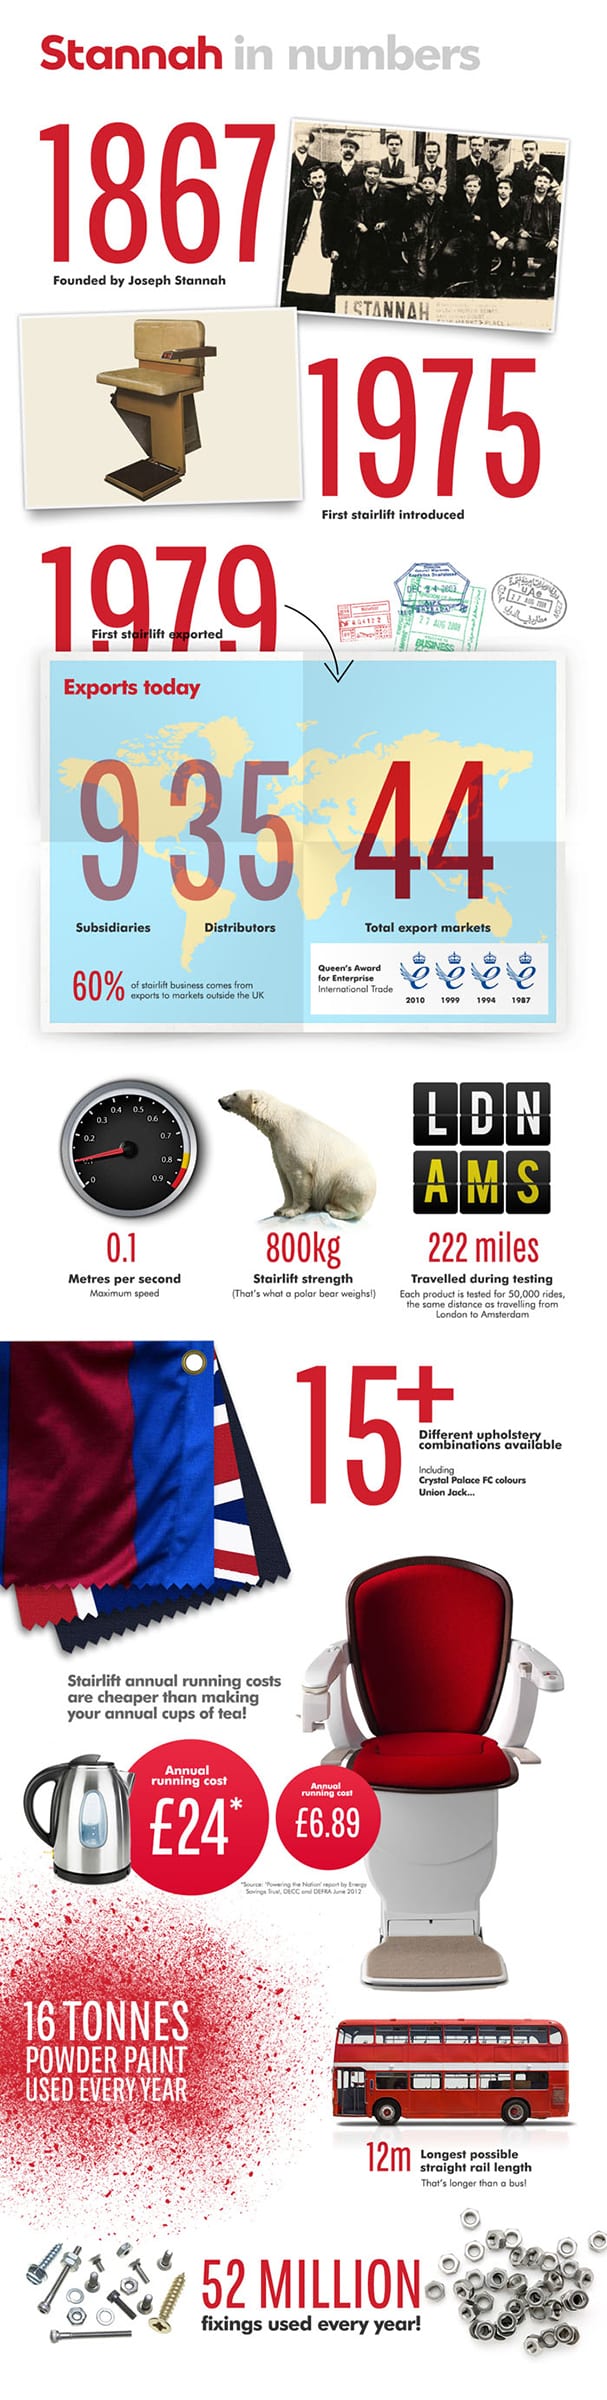 Stannah by numbers Infographic